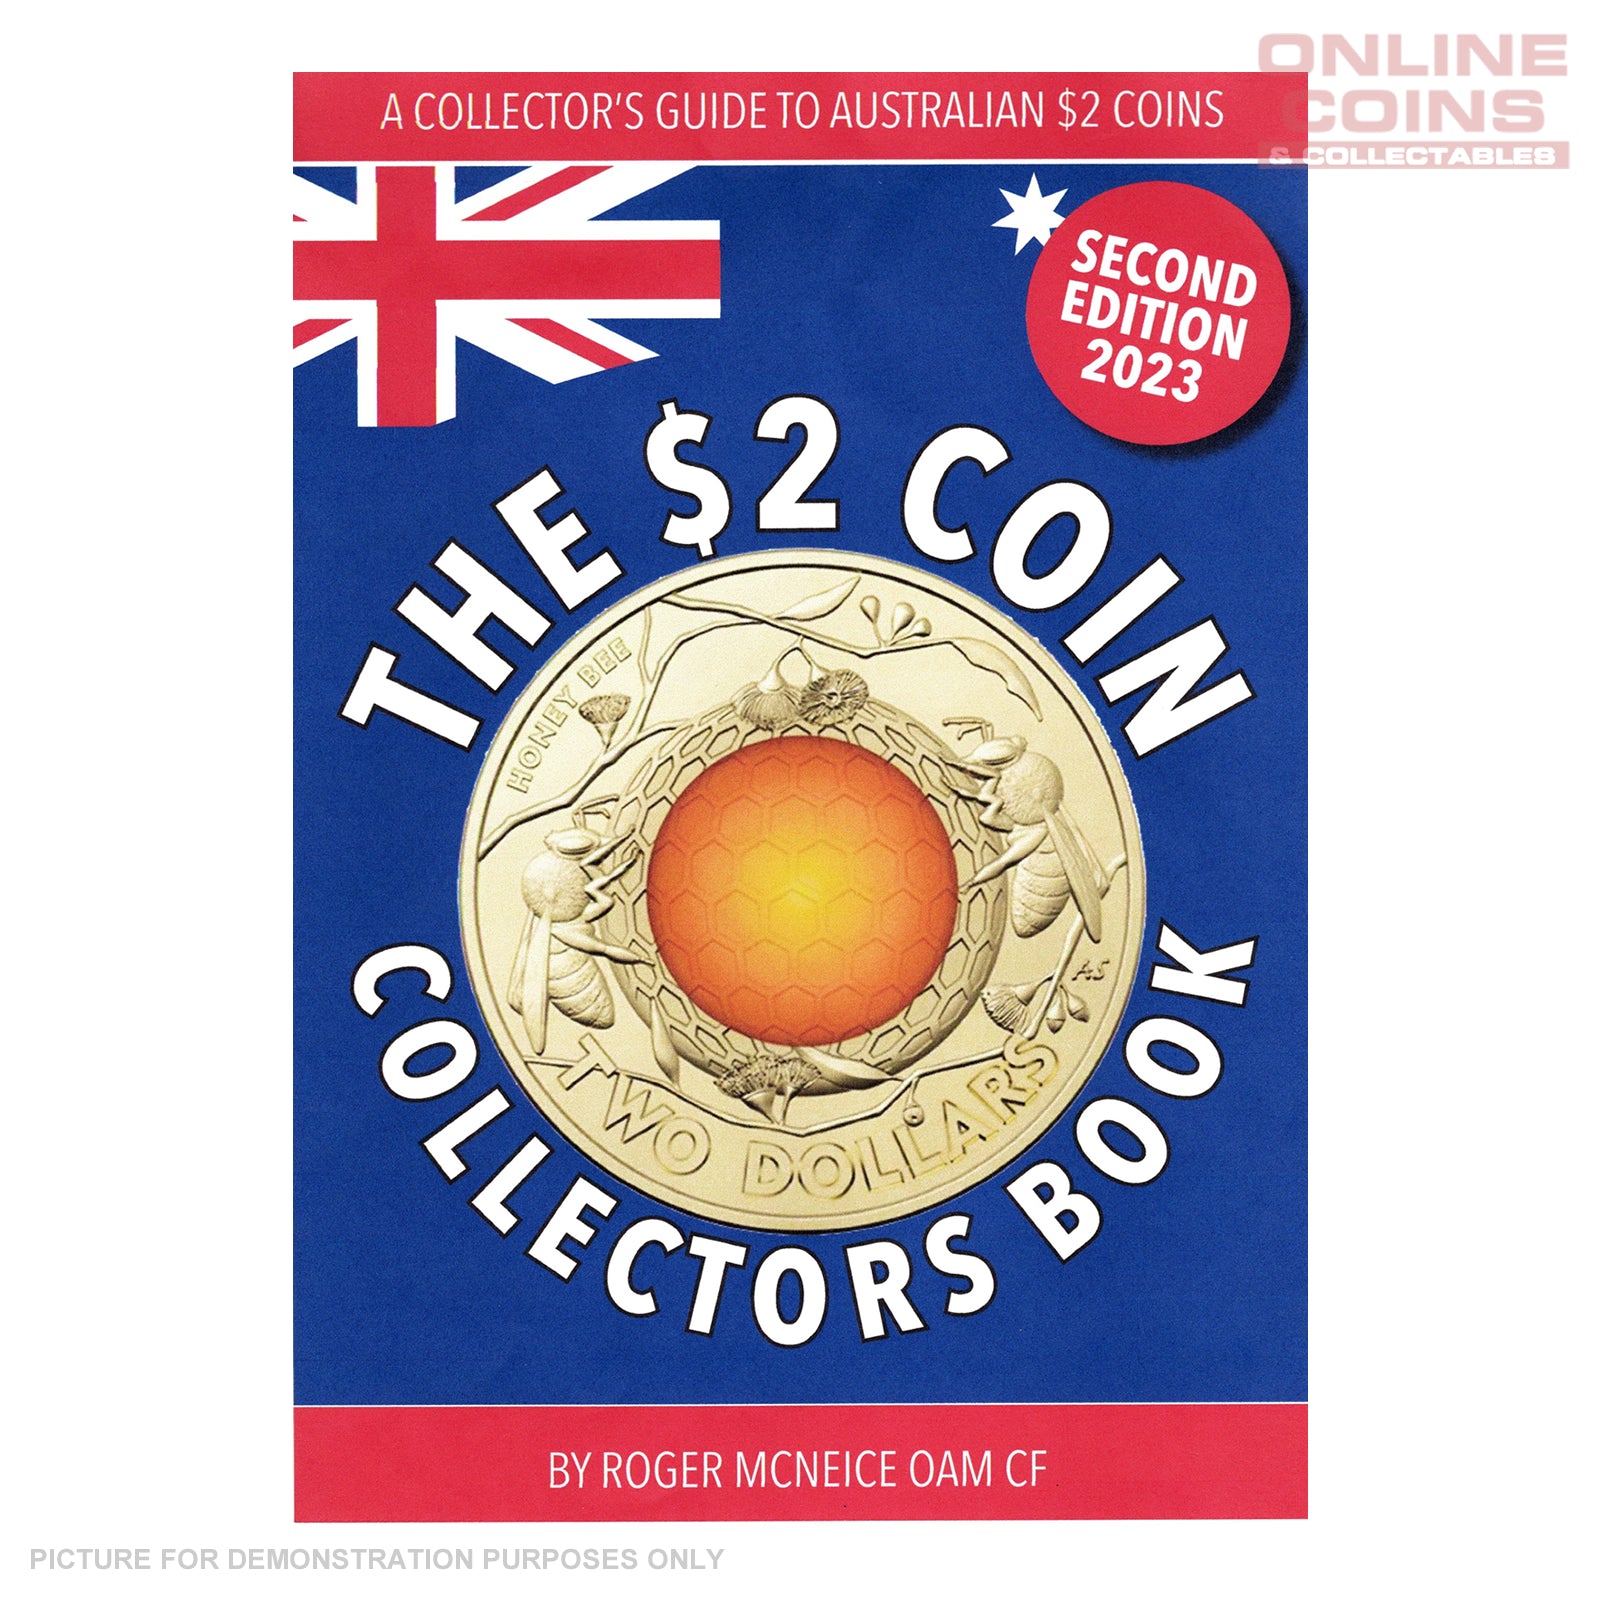 The $2 Coin Collectors Book - Second Edition by Roger McNeice - PRE ORDER (Delayed with no current ETA)